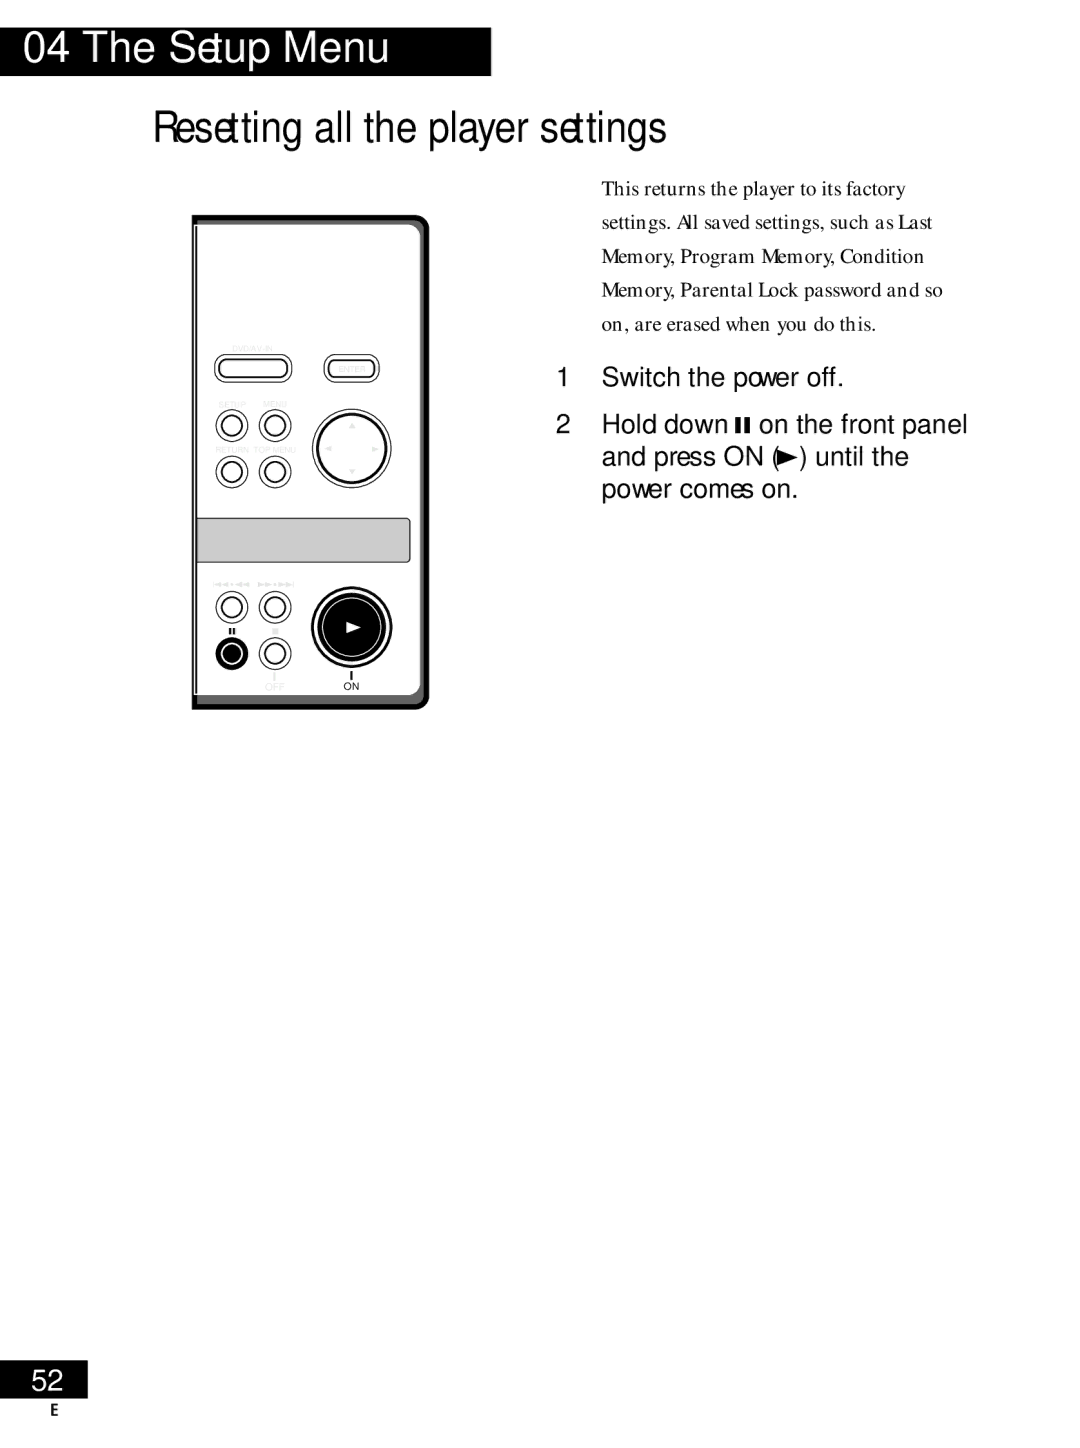 Pioneer PDV-20, PDV-LC20 operating instructions Resetting all the player settings, Switch the power off 